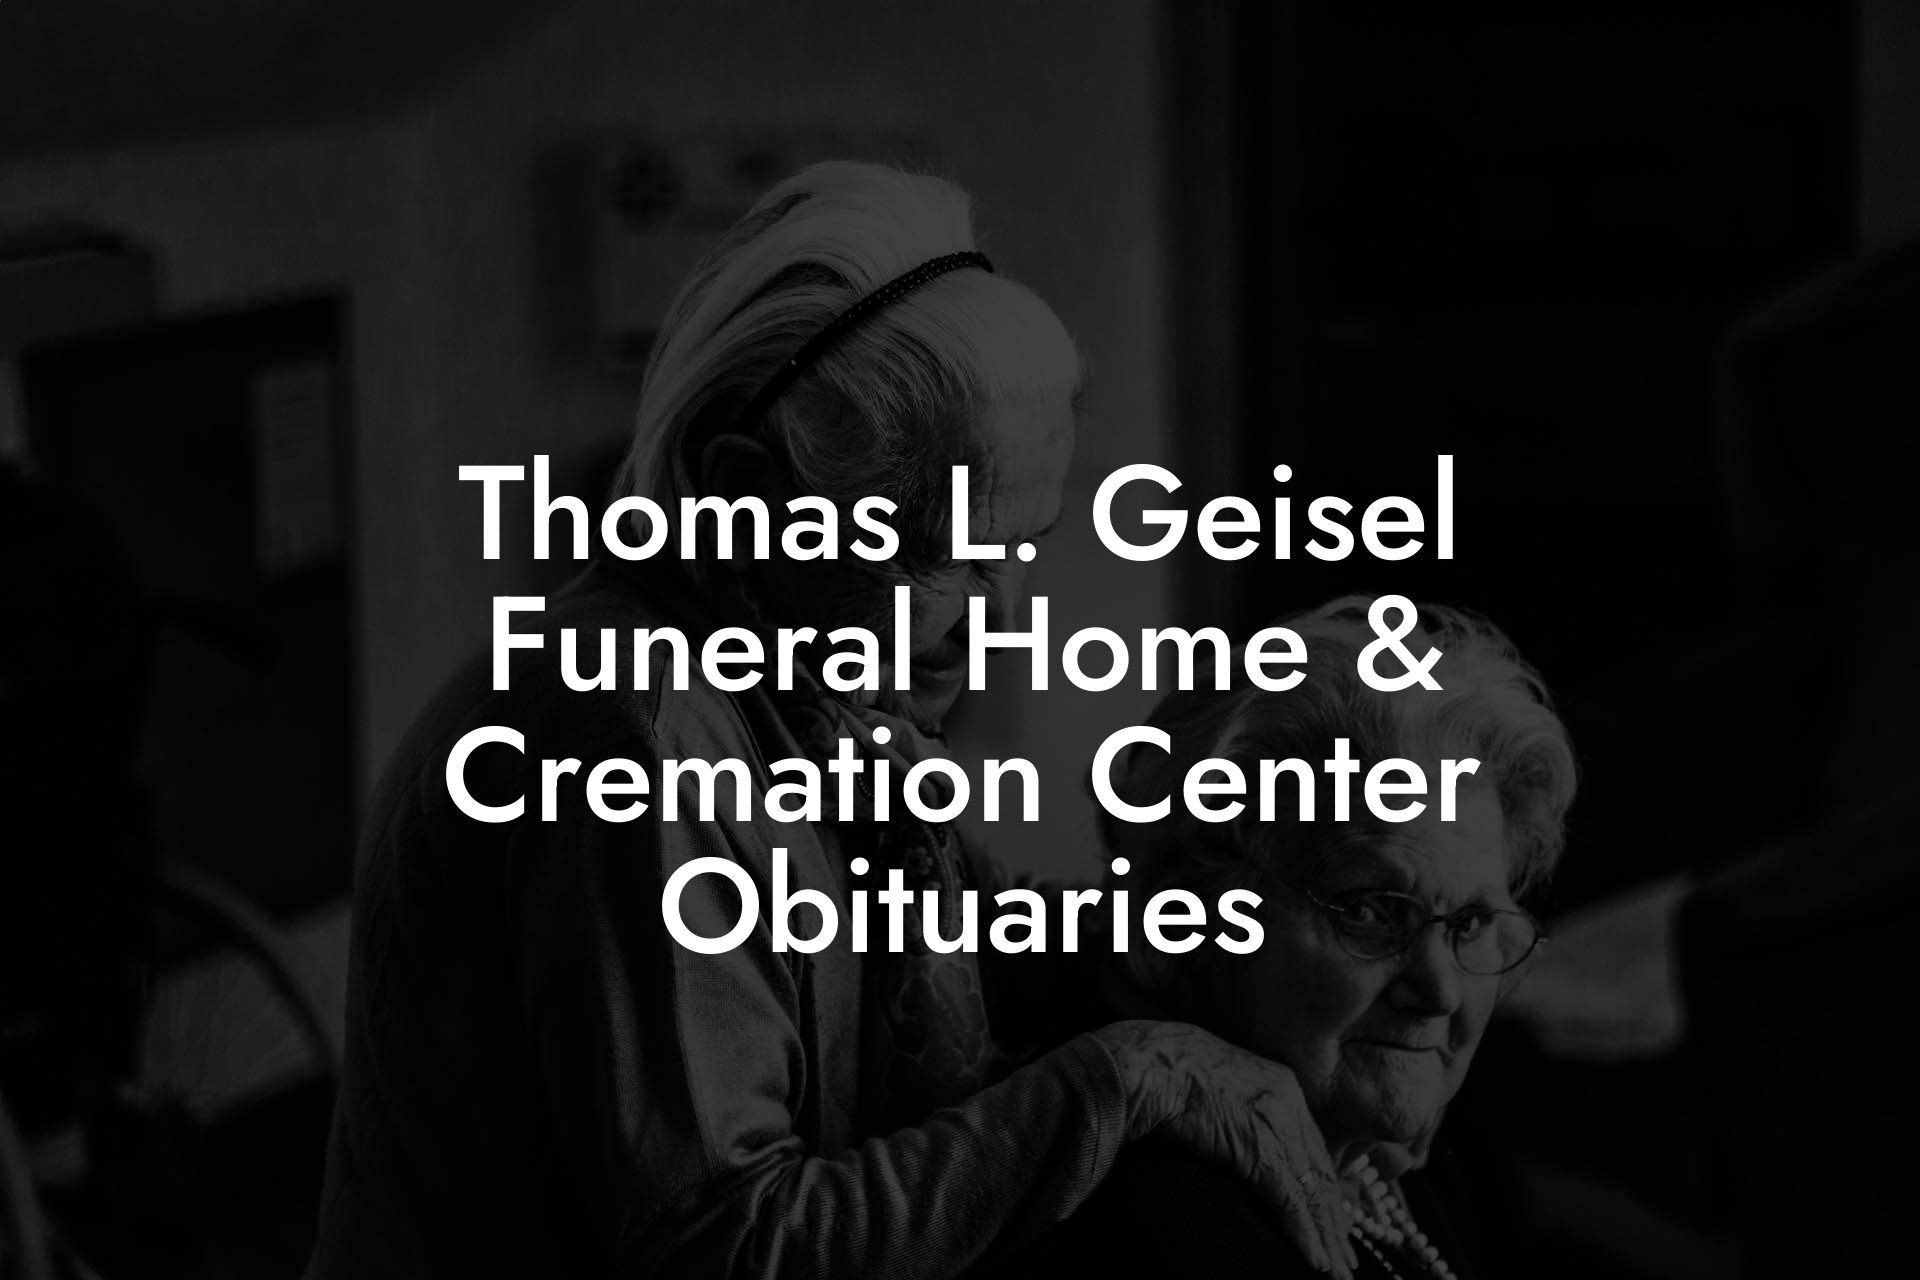 Thomas L. Geisel Funeral Home & Cremation Center Obituaries